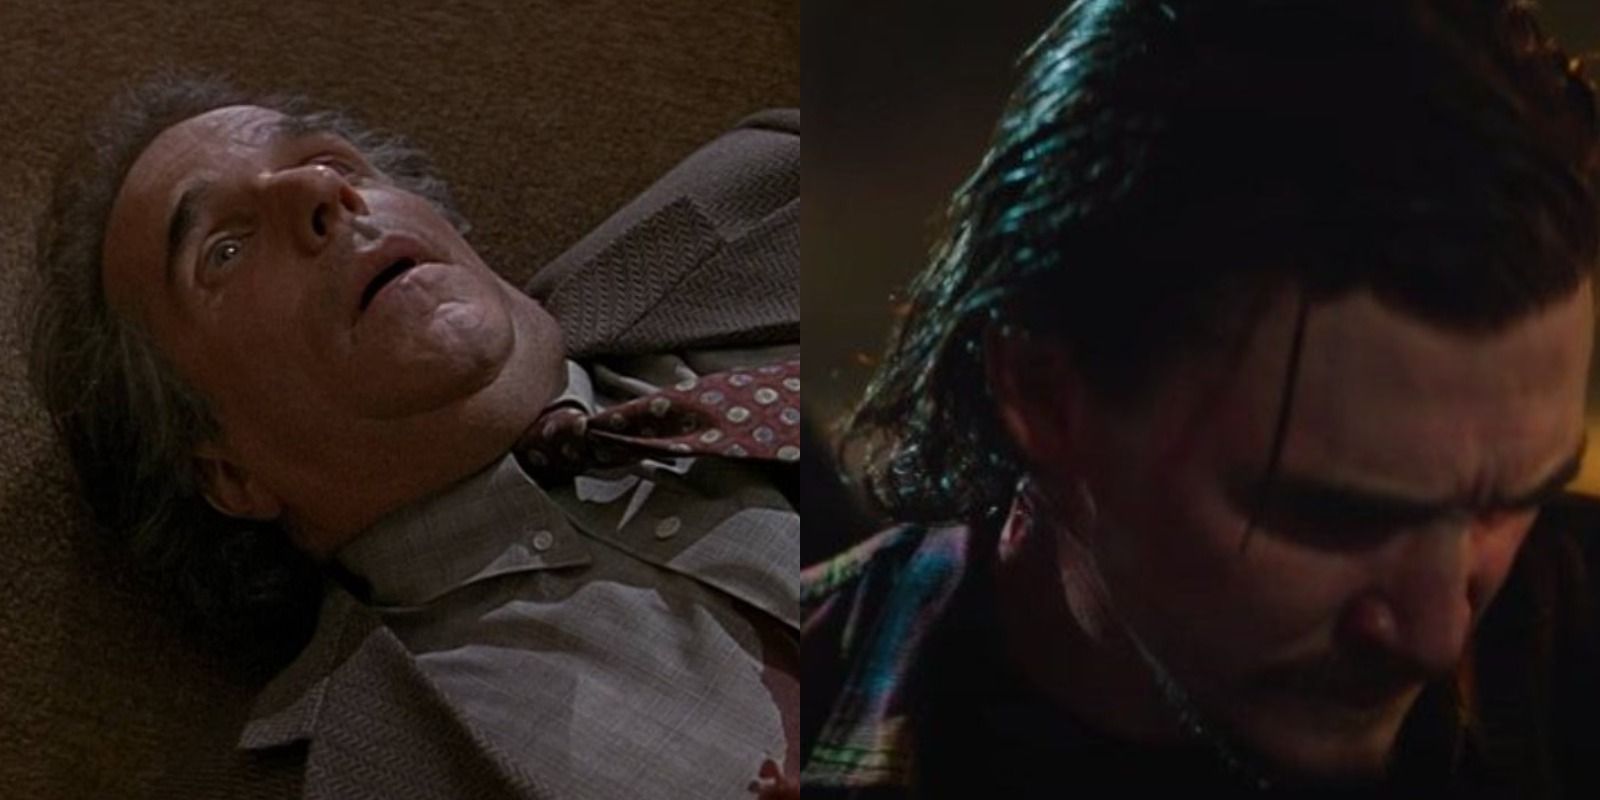 Split image of Principal Himbrey on left and Vince Schneider on the right in the Scream franchise